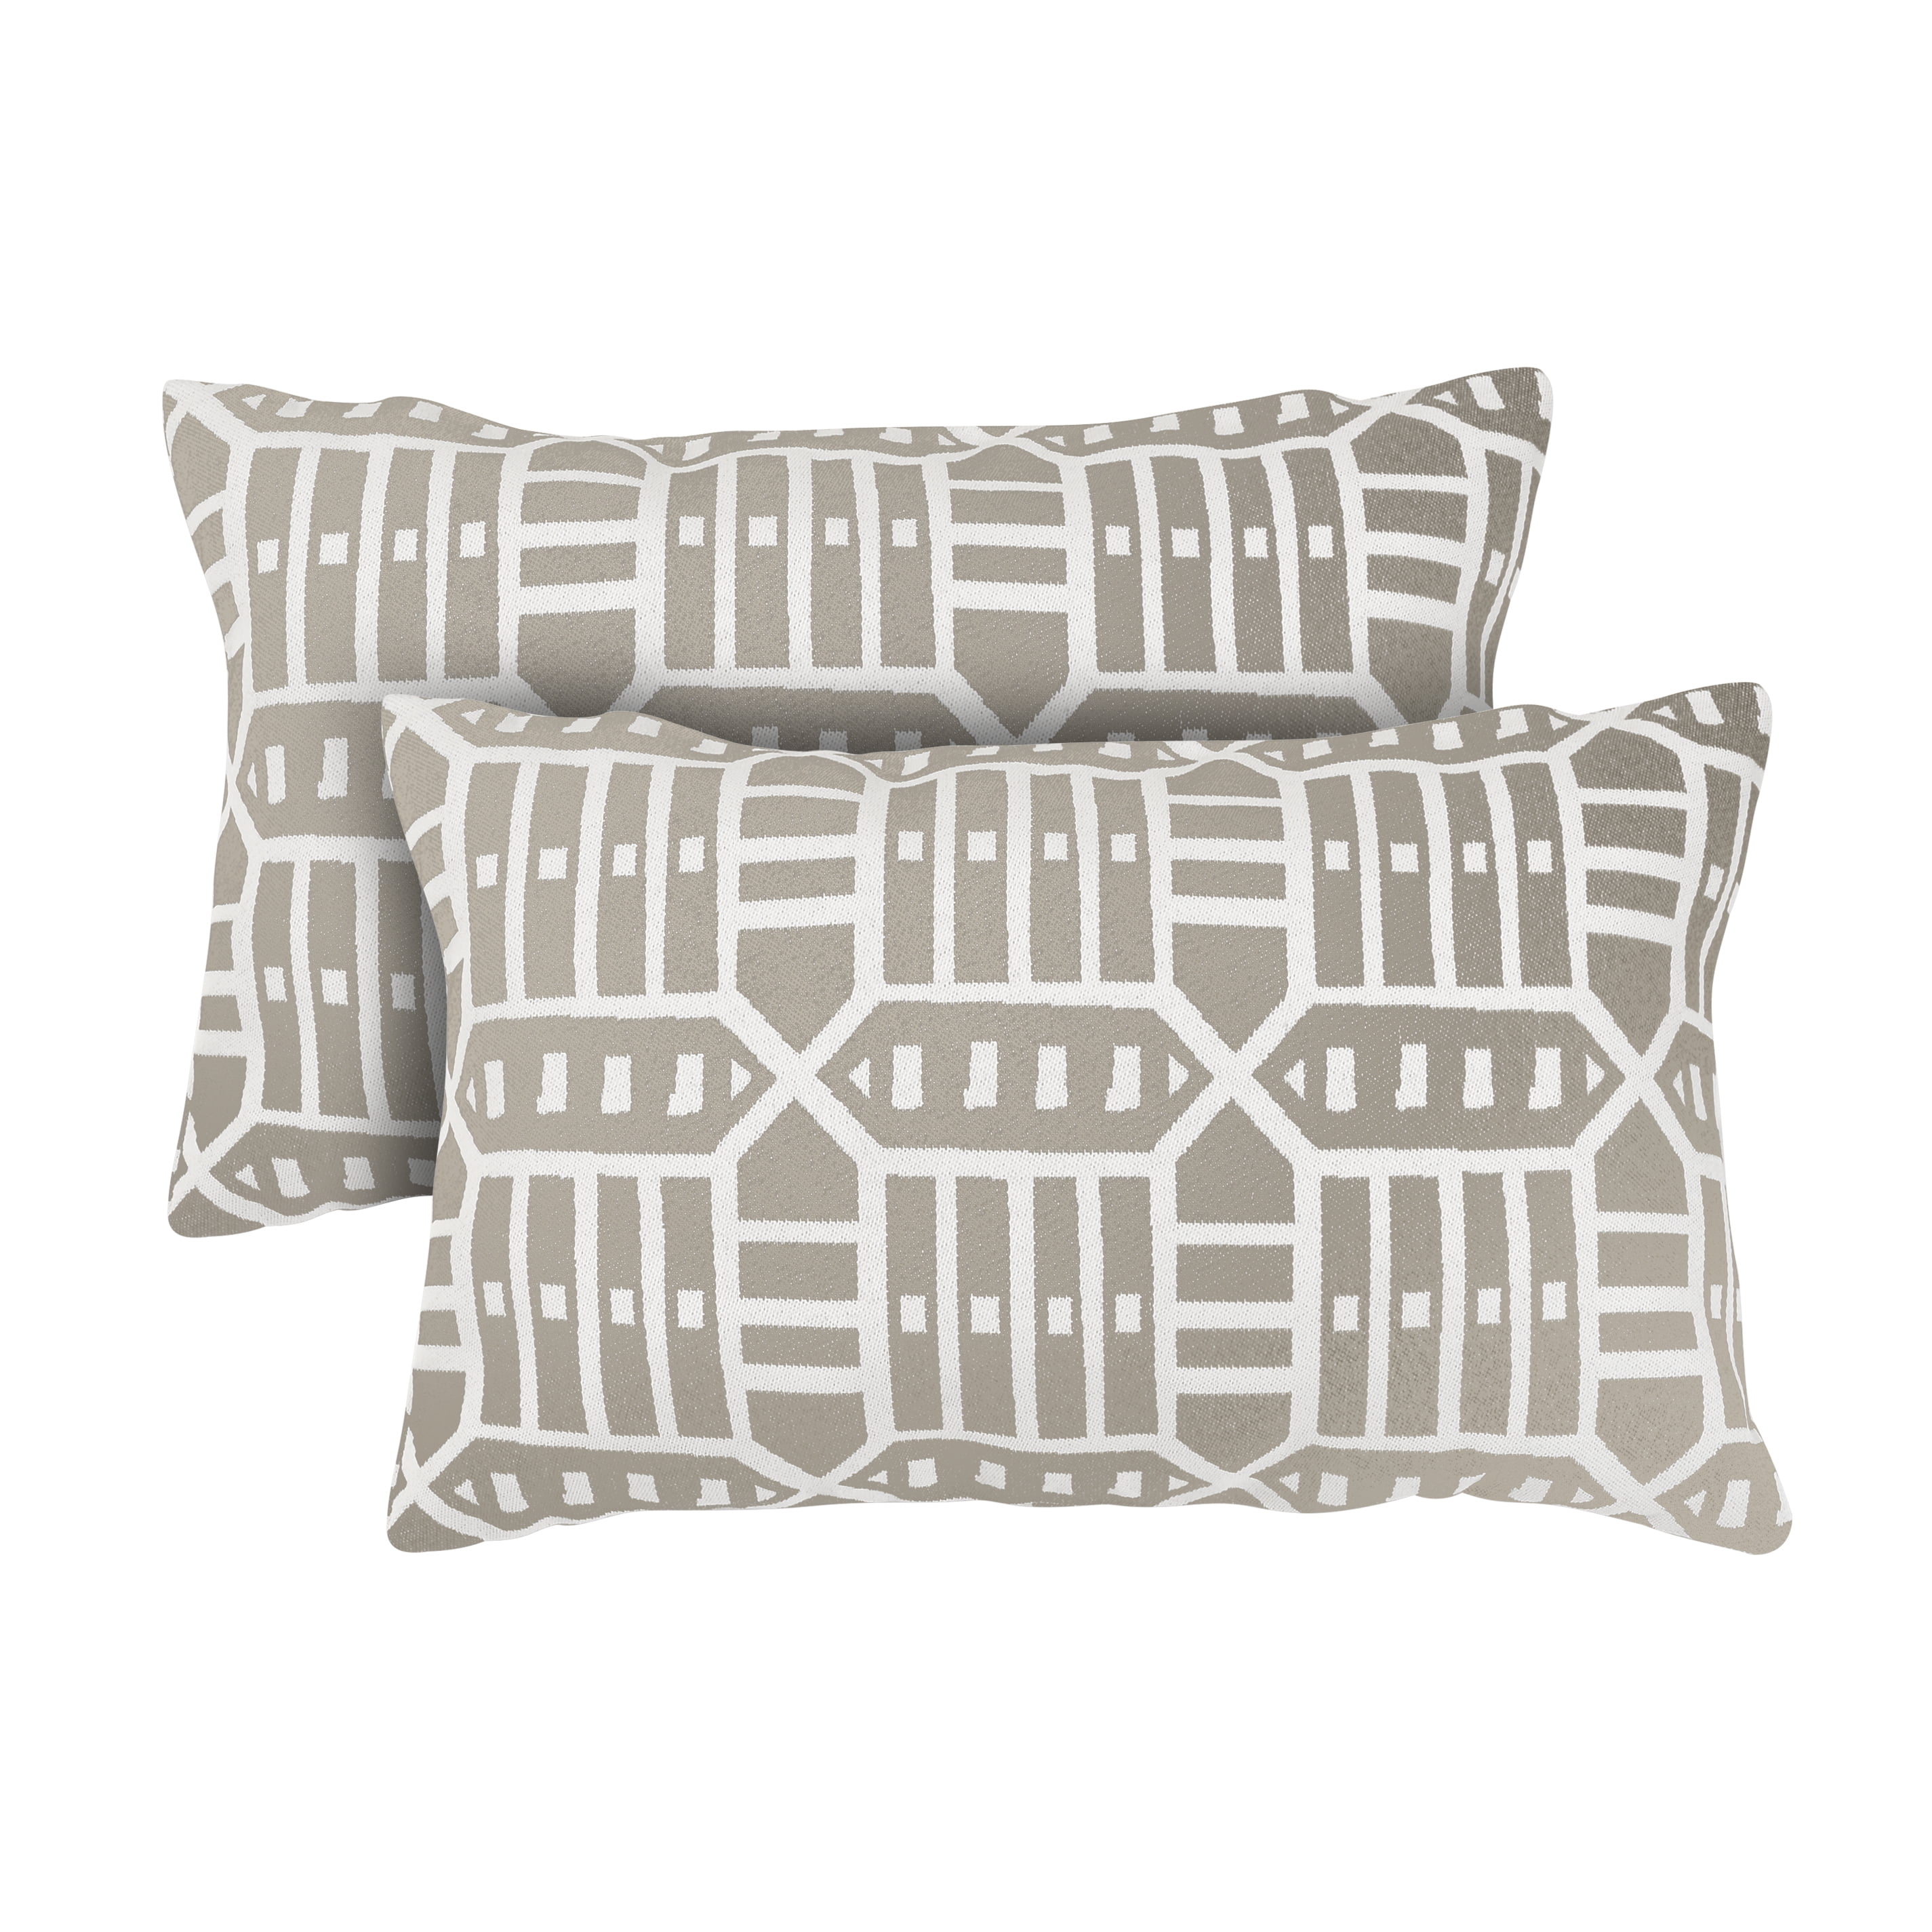 18 by 18-Inch Gray Be-You-tiful Home Basic Pillow